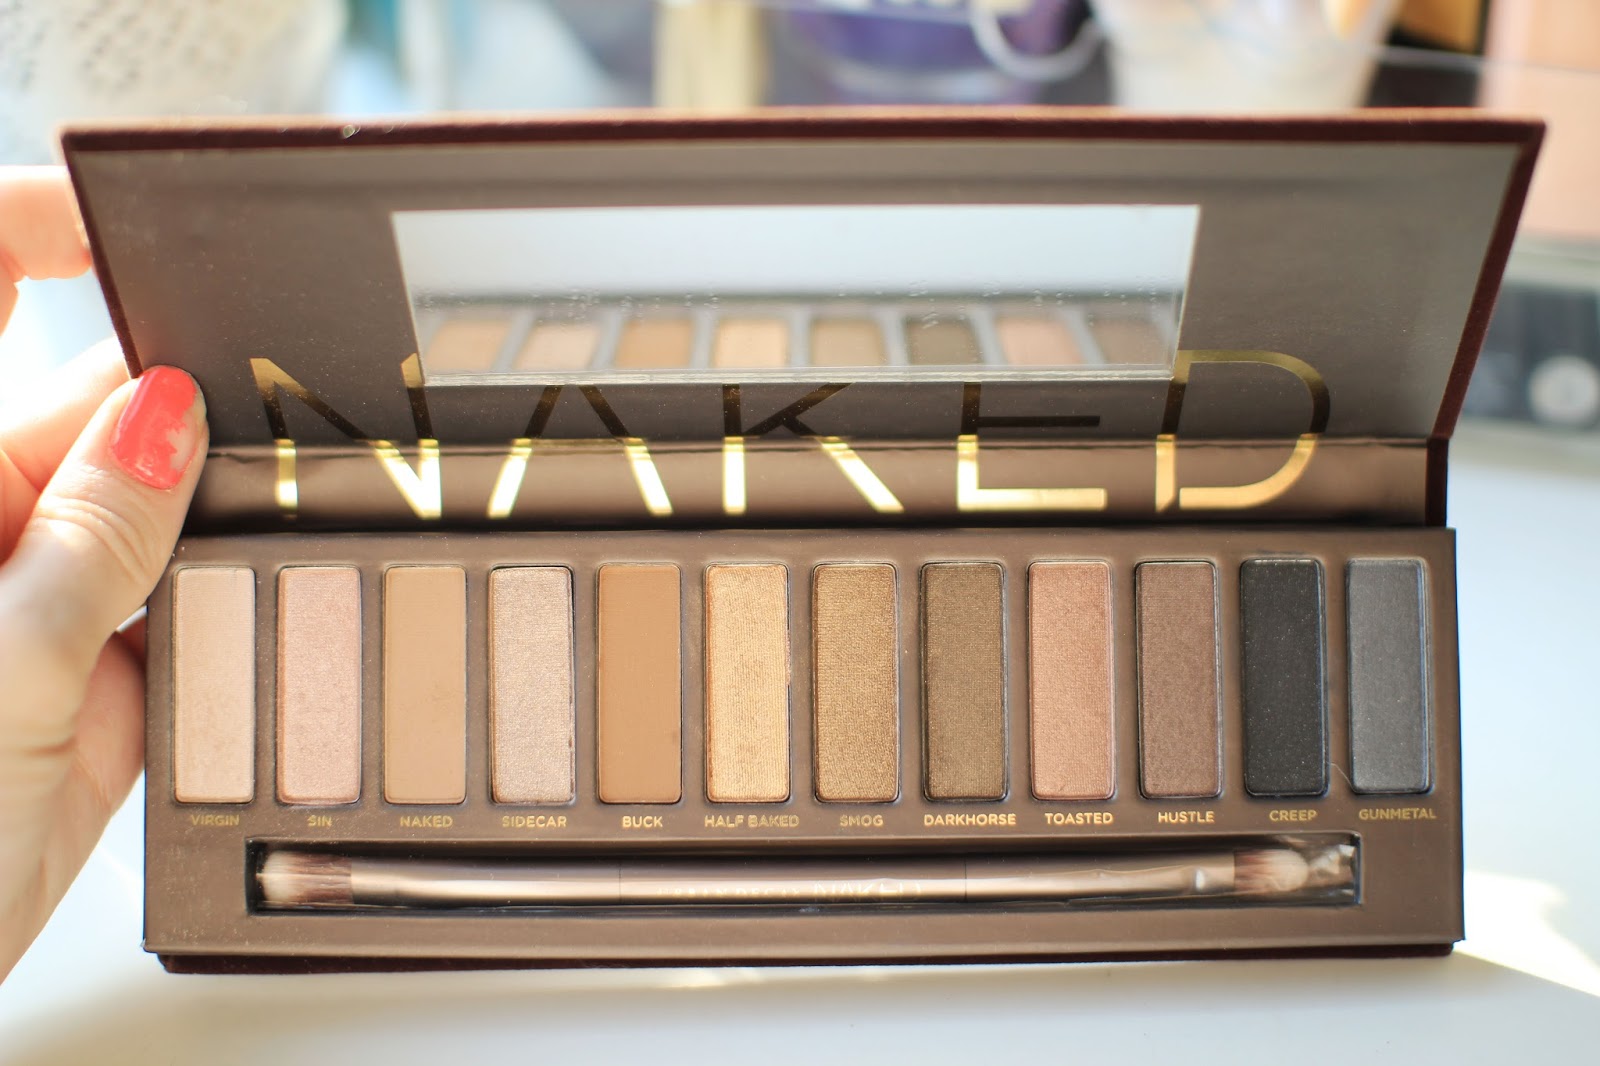 Makeup Monday: The NEW Urban Decay Naked Palette- Naked 